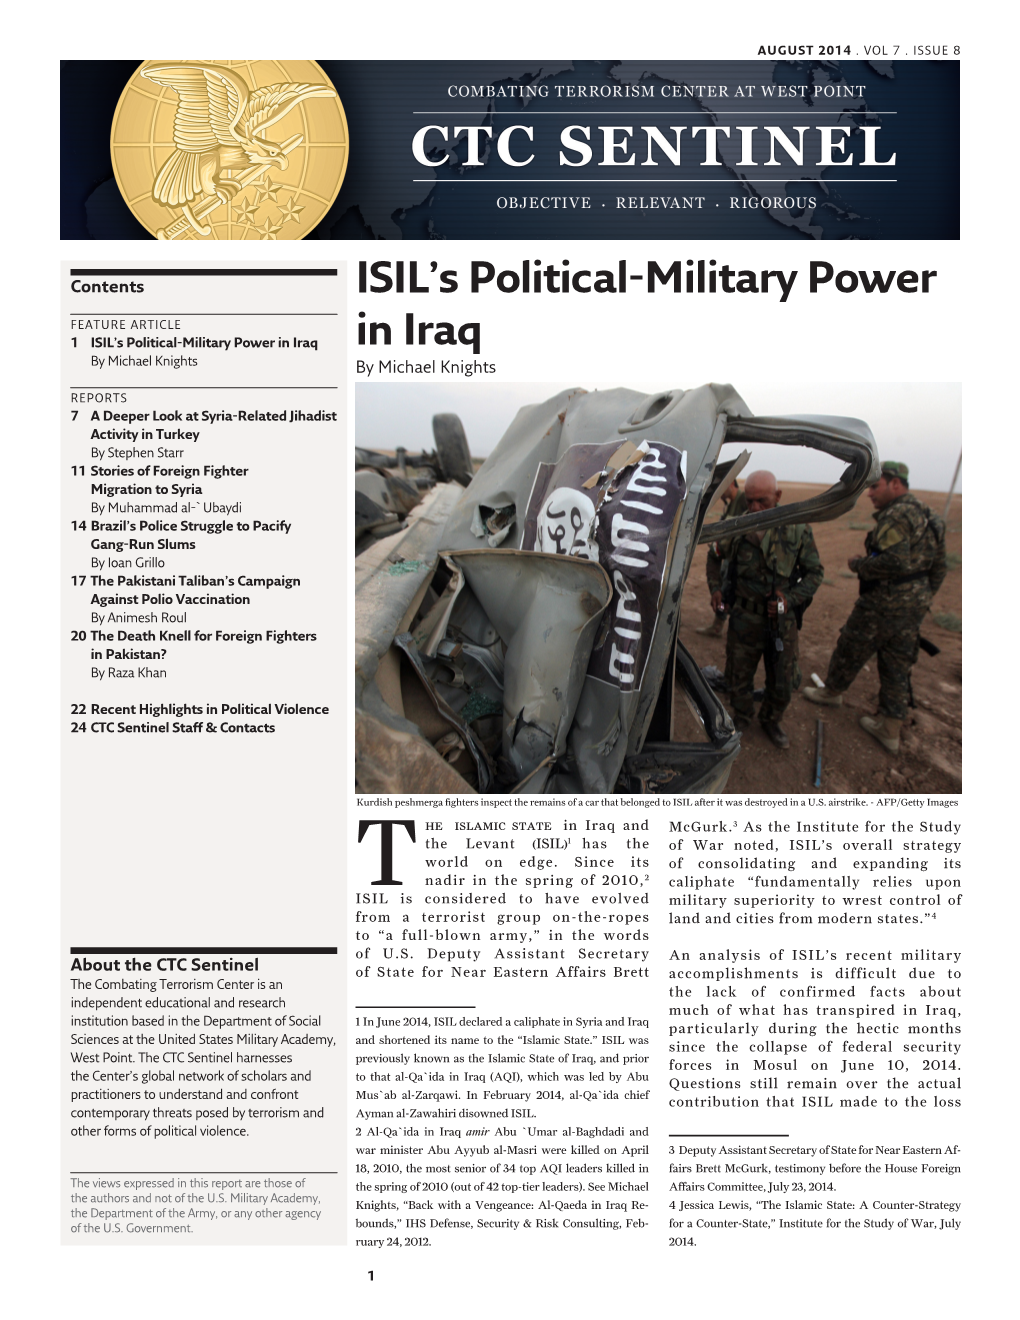 ISIL's Political-Military Power in Iraq